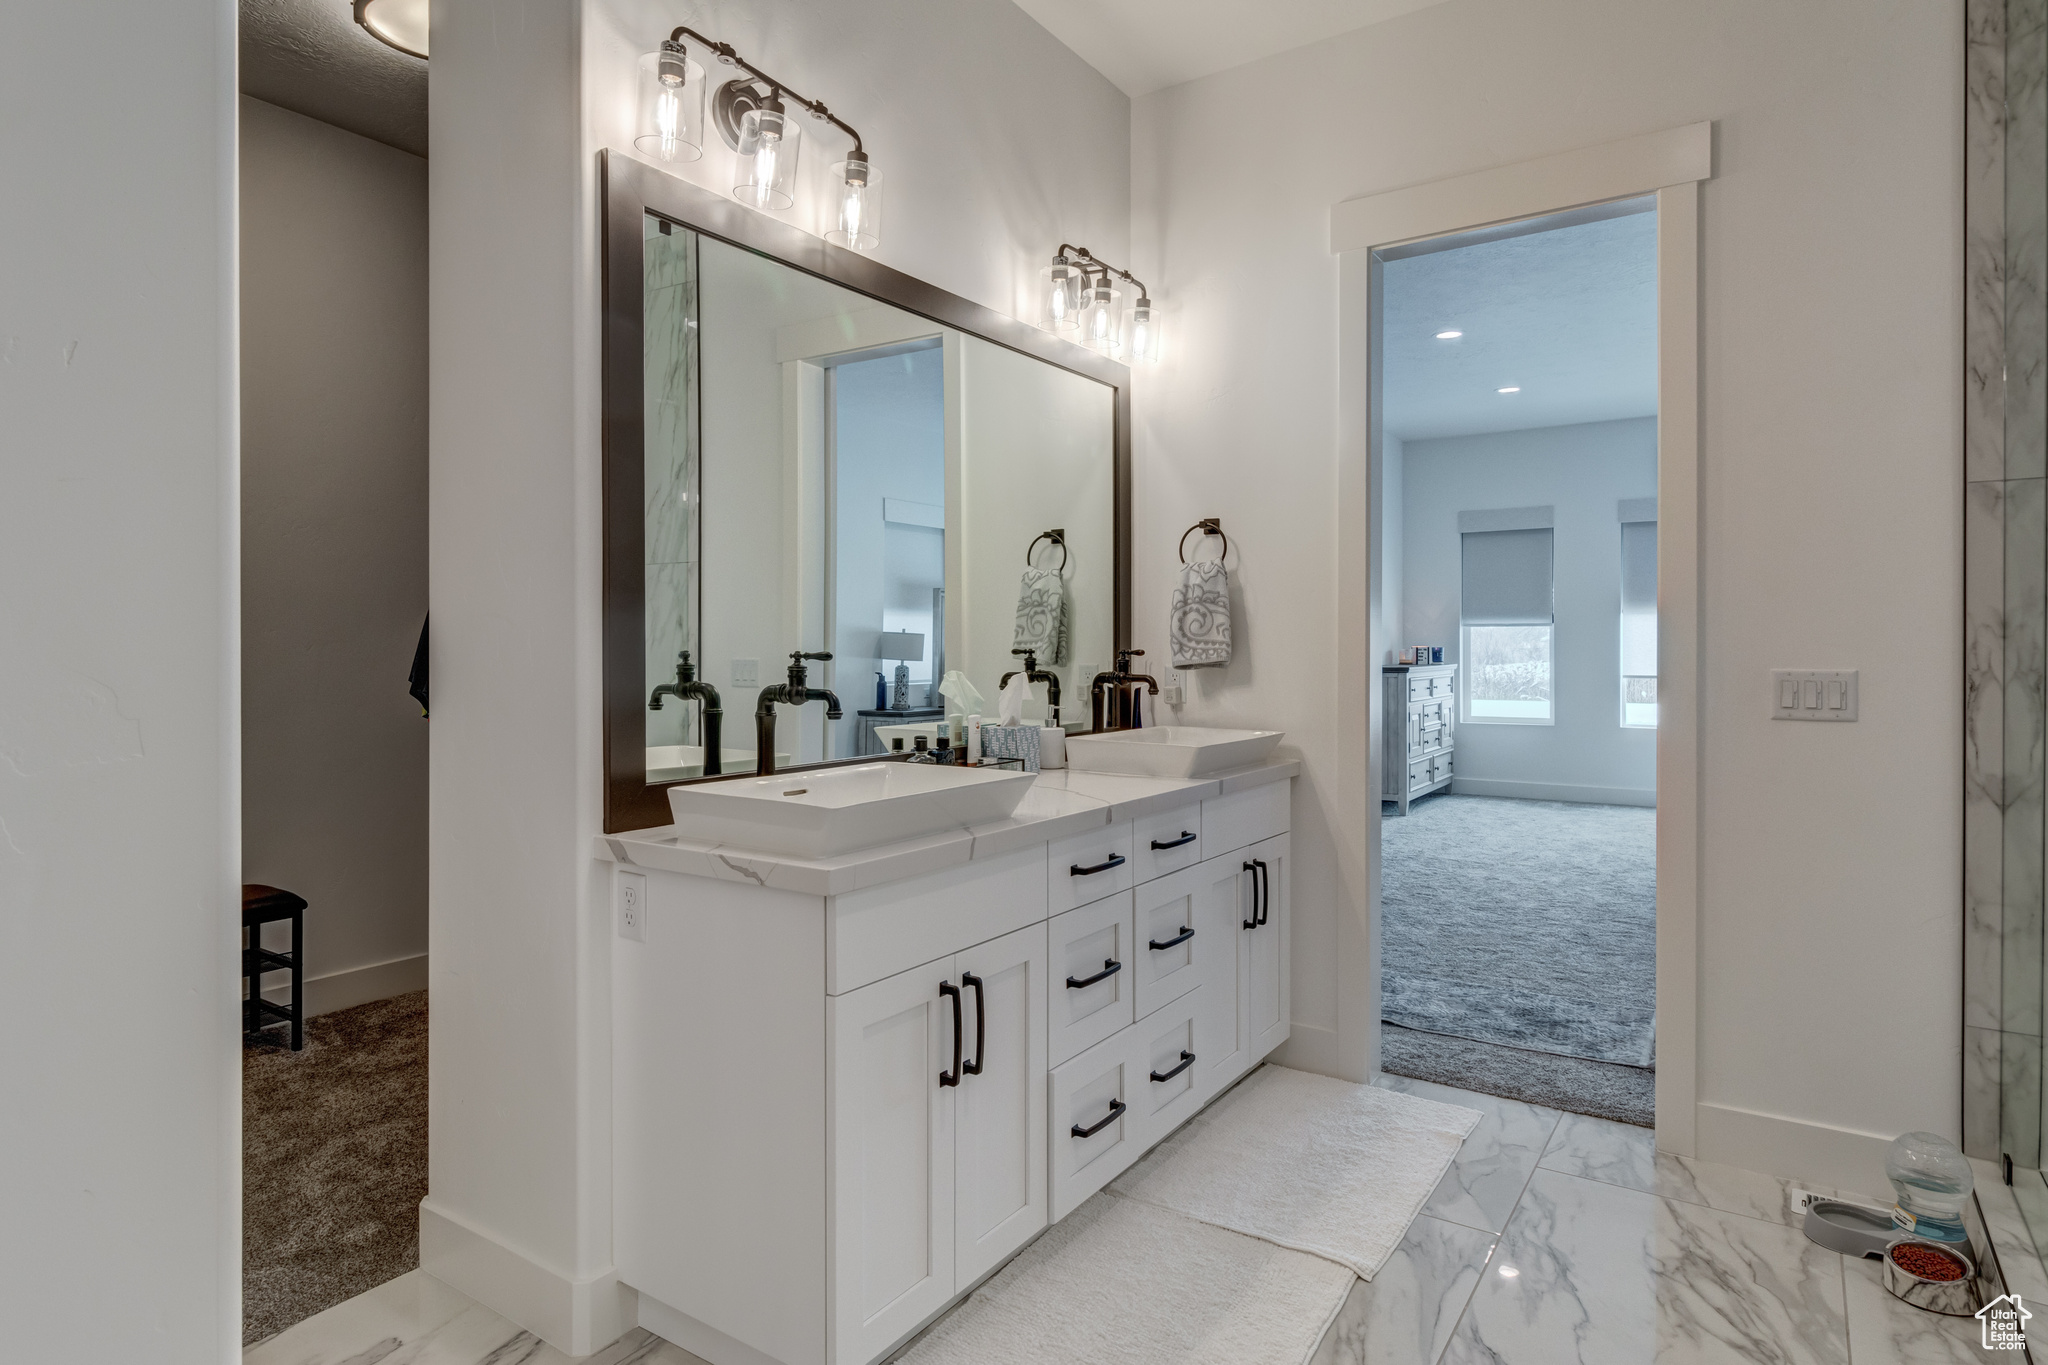 Bathroom featuring tile floors, large vanity, and double sink